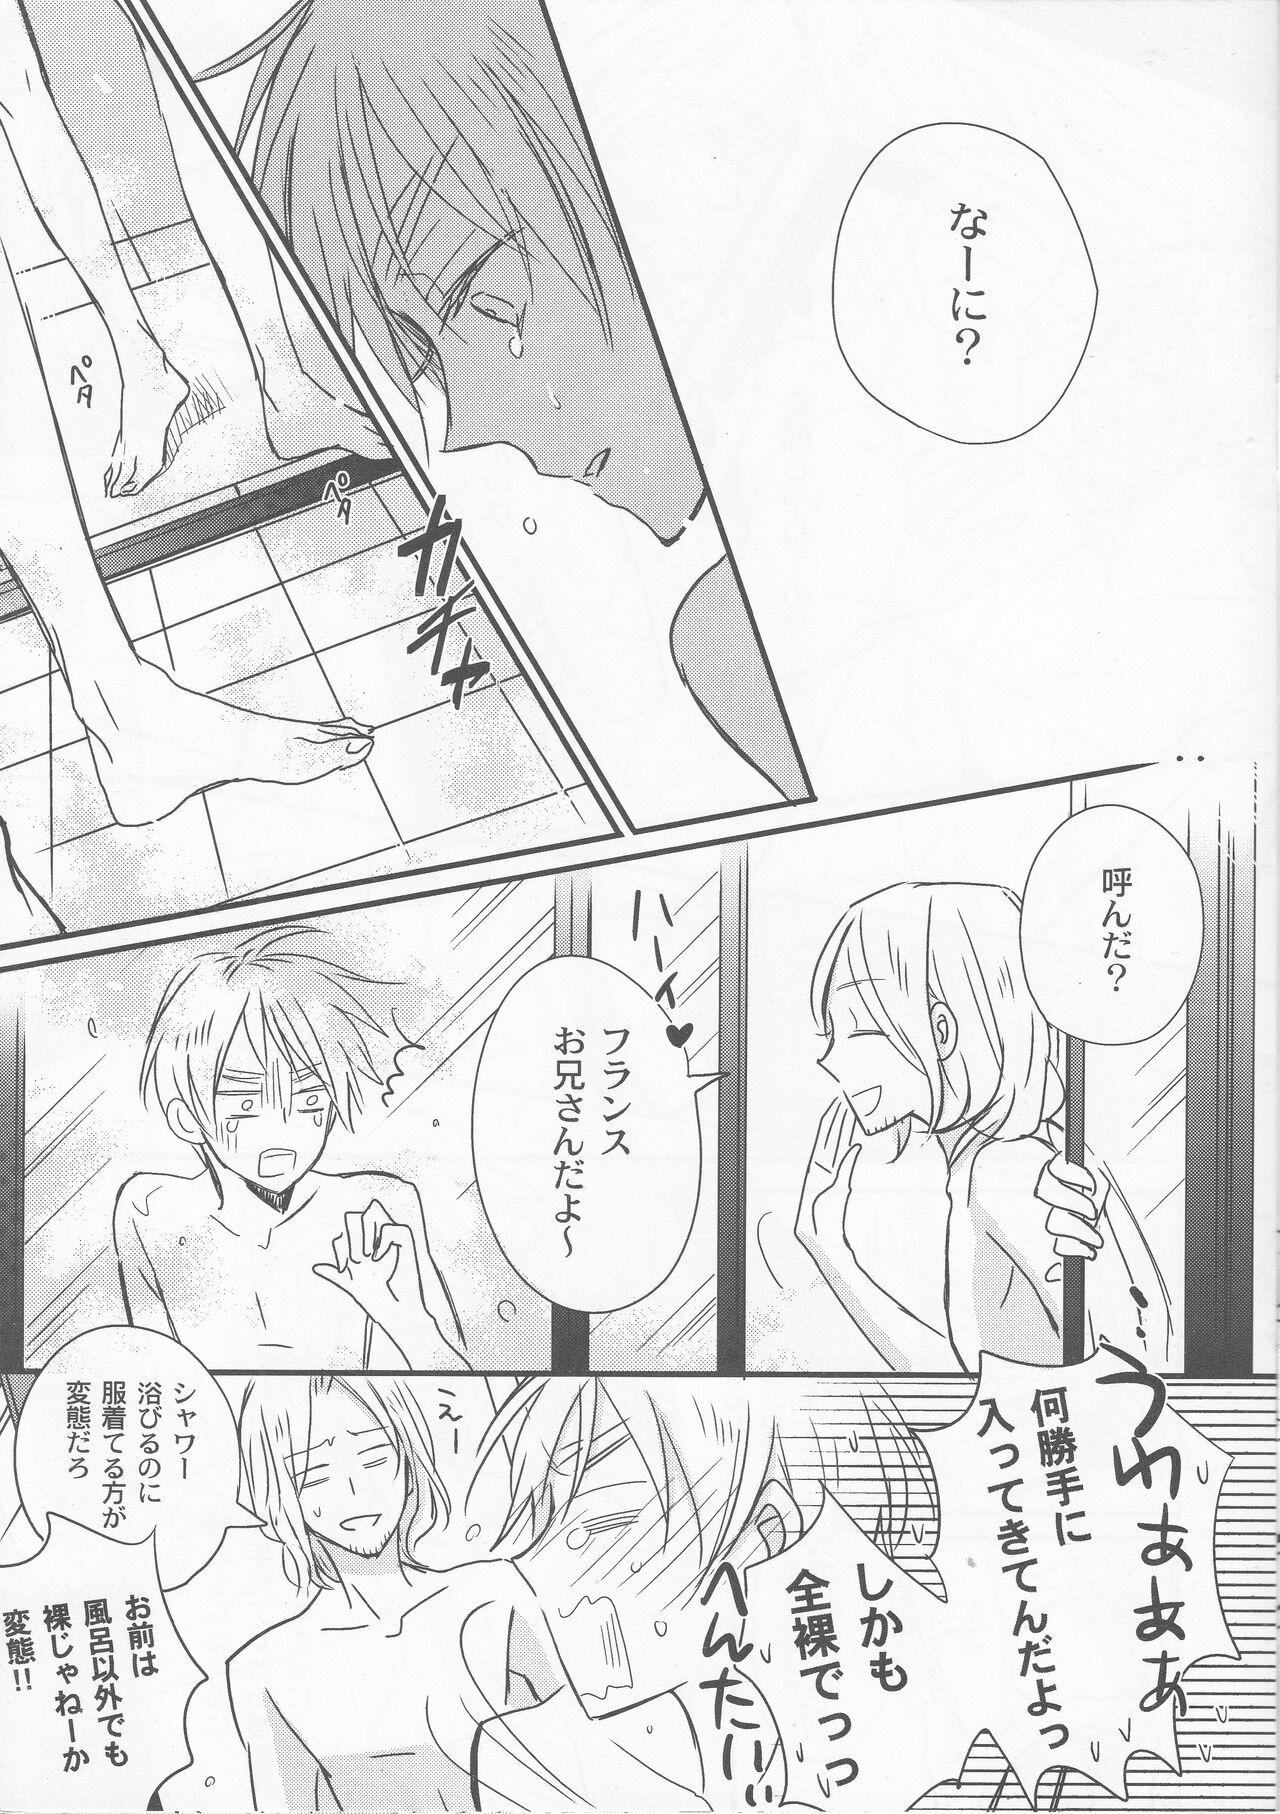 Fucked unknown title - Axis powers hetalia Gay Domination - Page 8